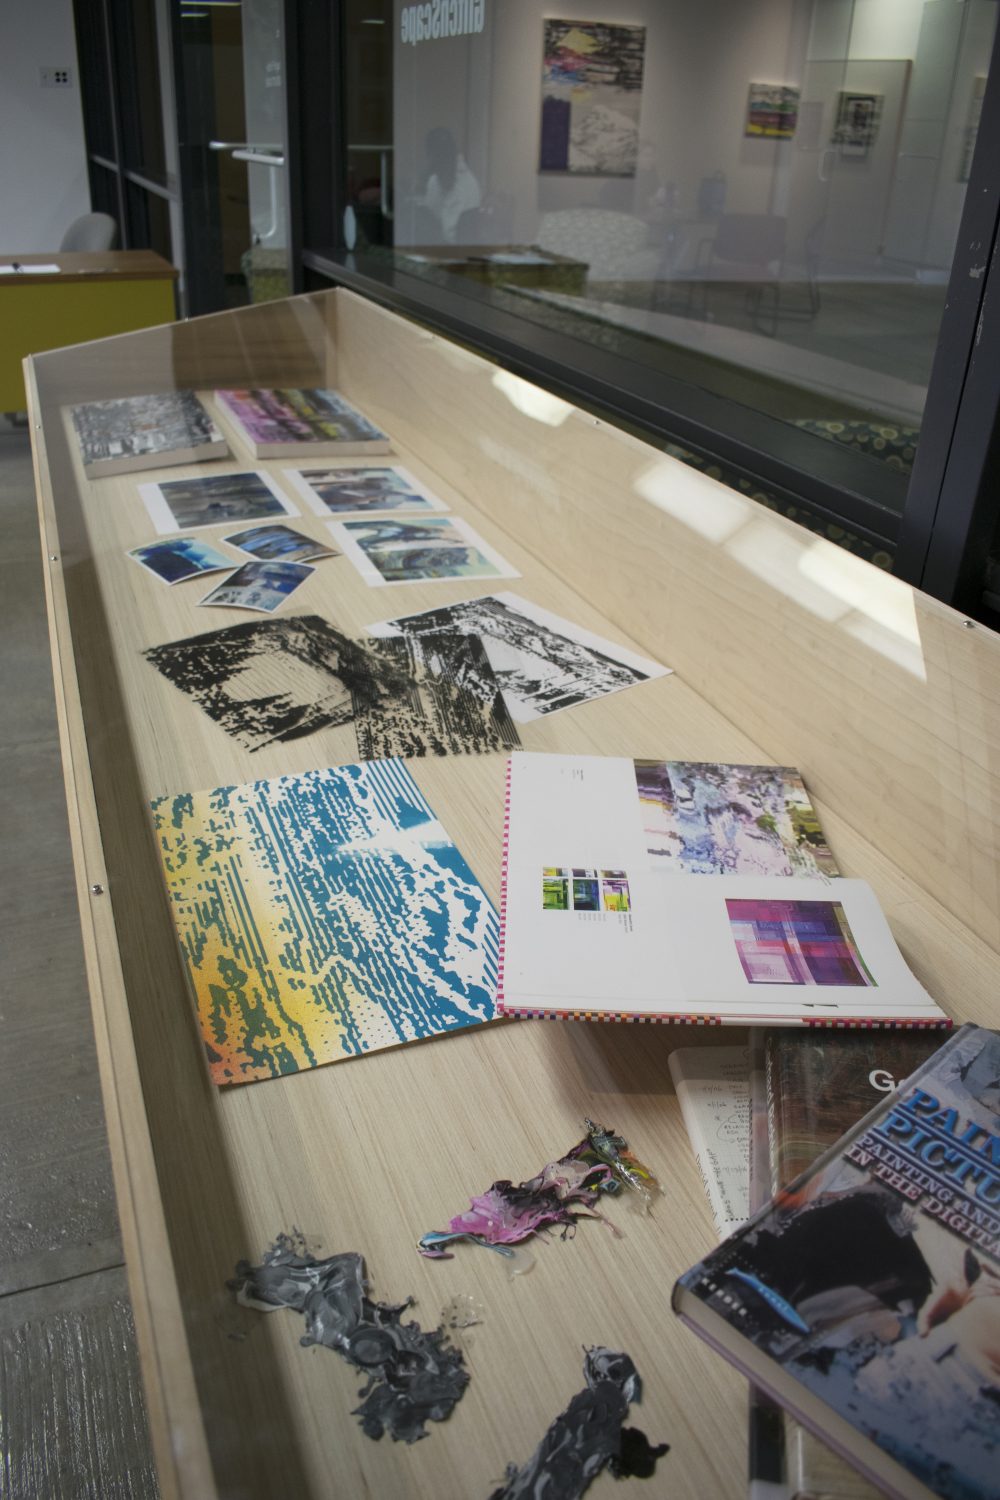 View of case that contains materials used to the paintings in the exhibition: prints, transparencies, paint, books.